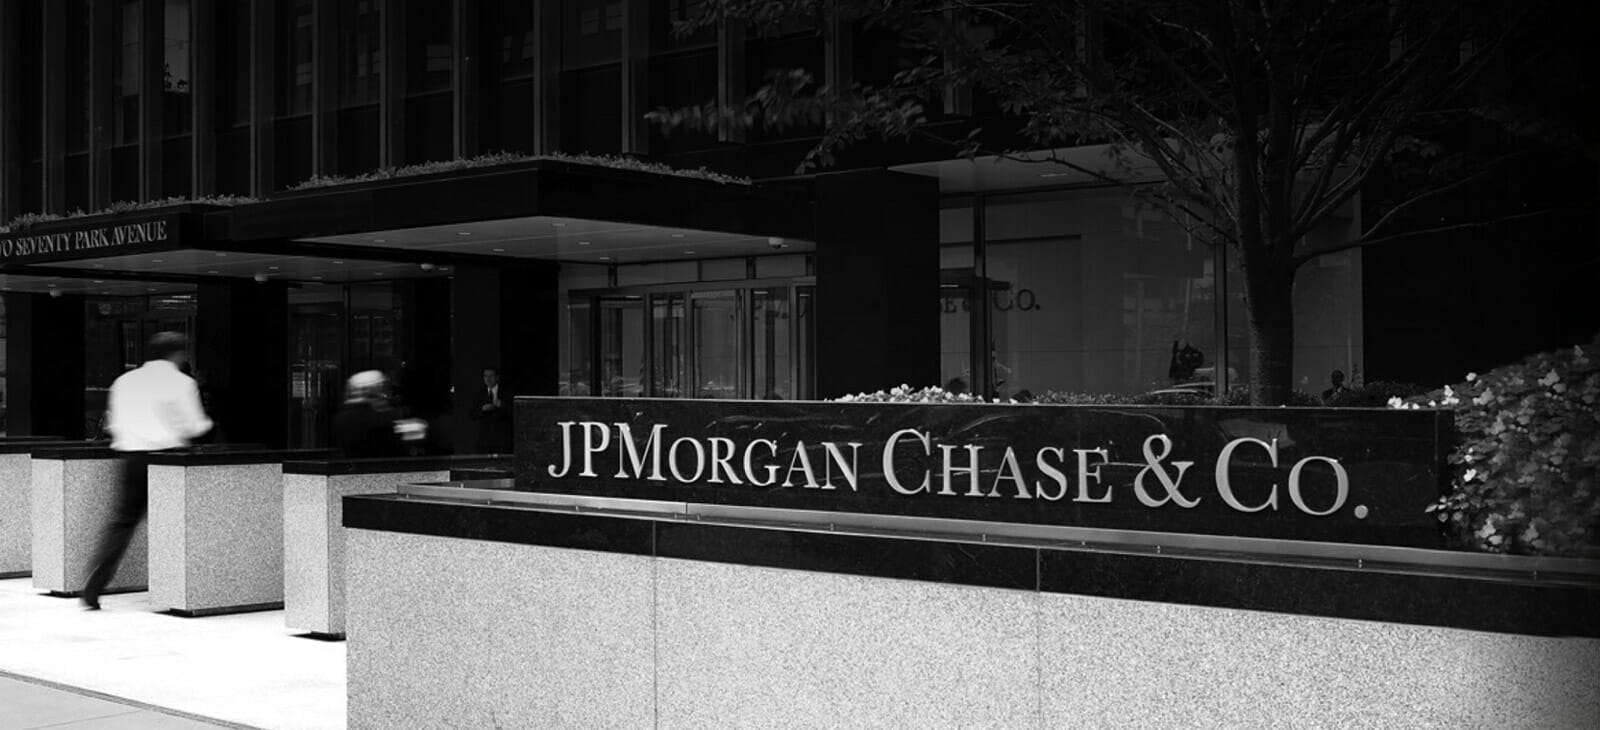 Jpmorgan Chase Co Learn About The Bank Holding Company